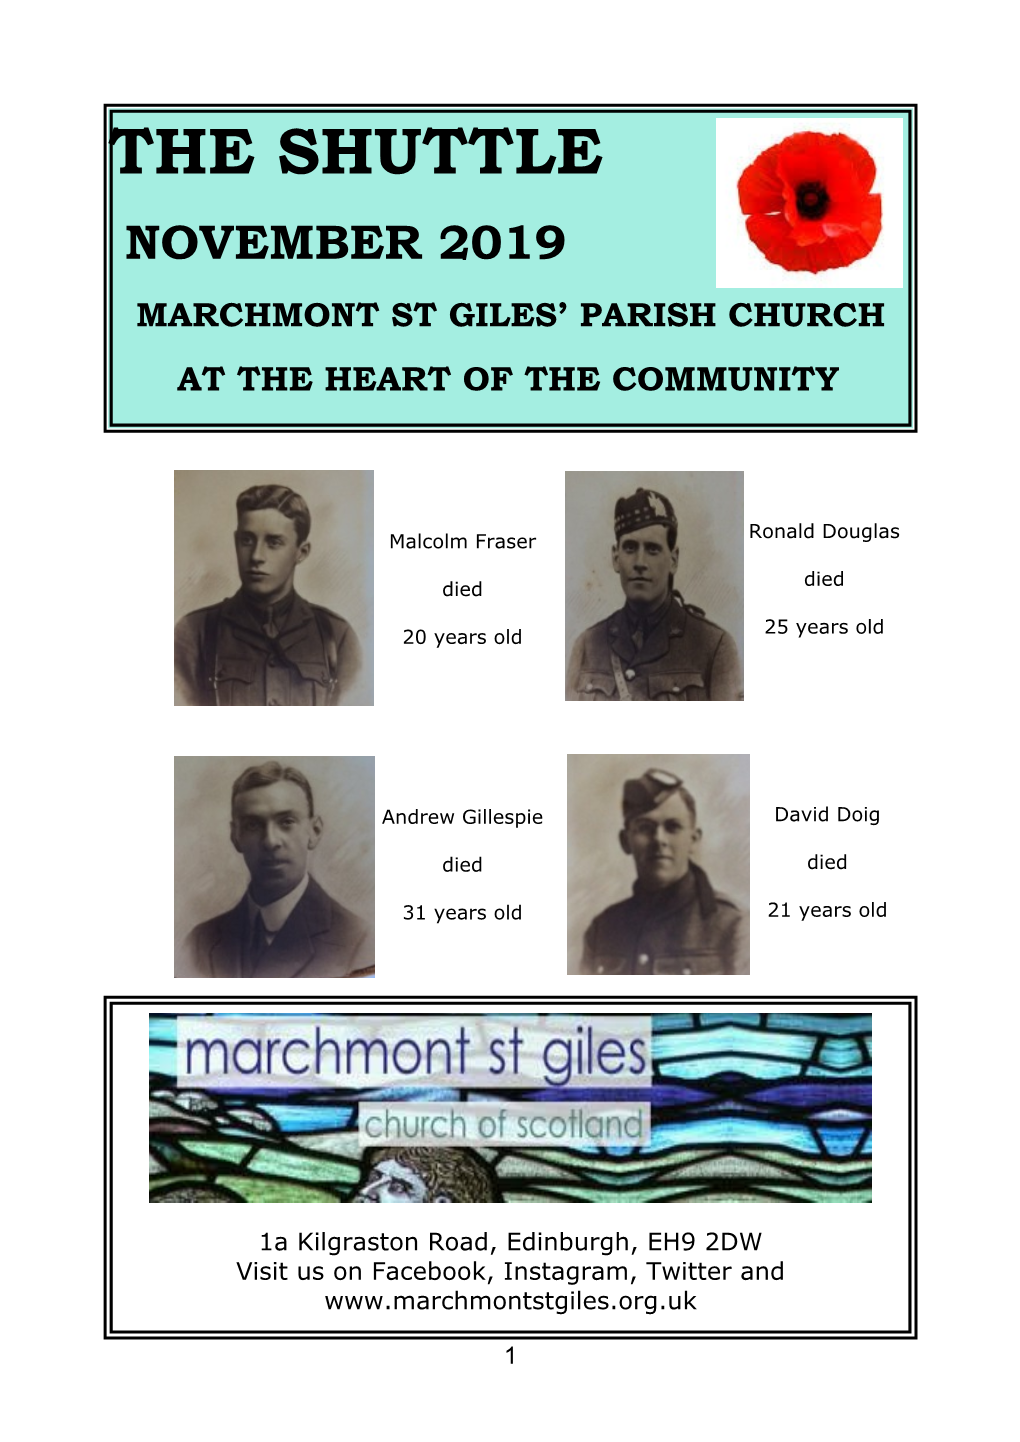 The Shuttle November 2019 Marchmont St Giles’ Parish Church at the Heart of the Community